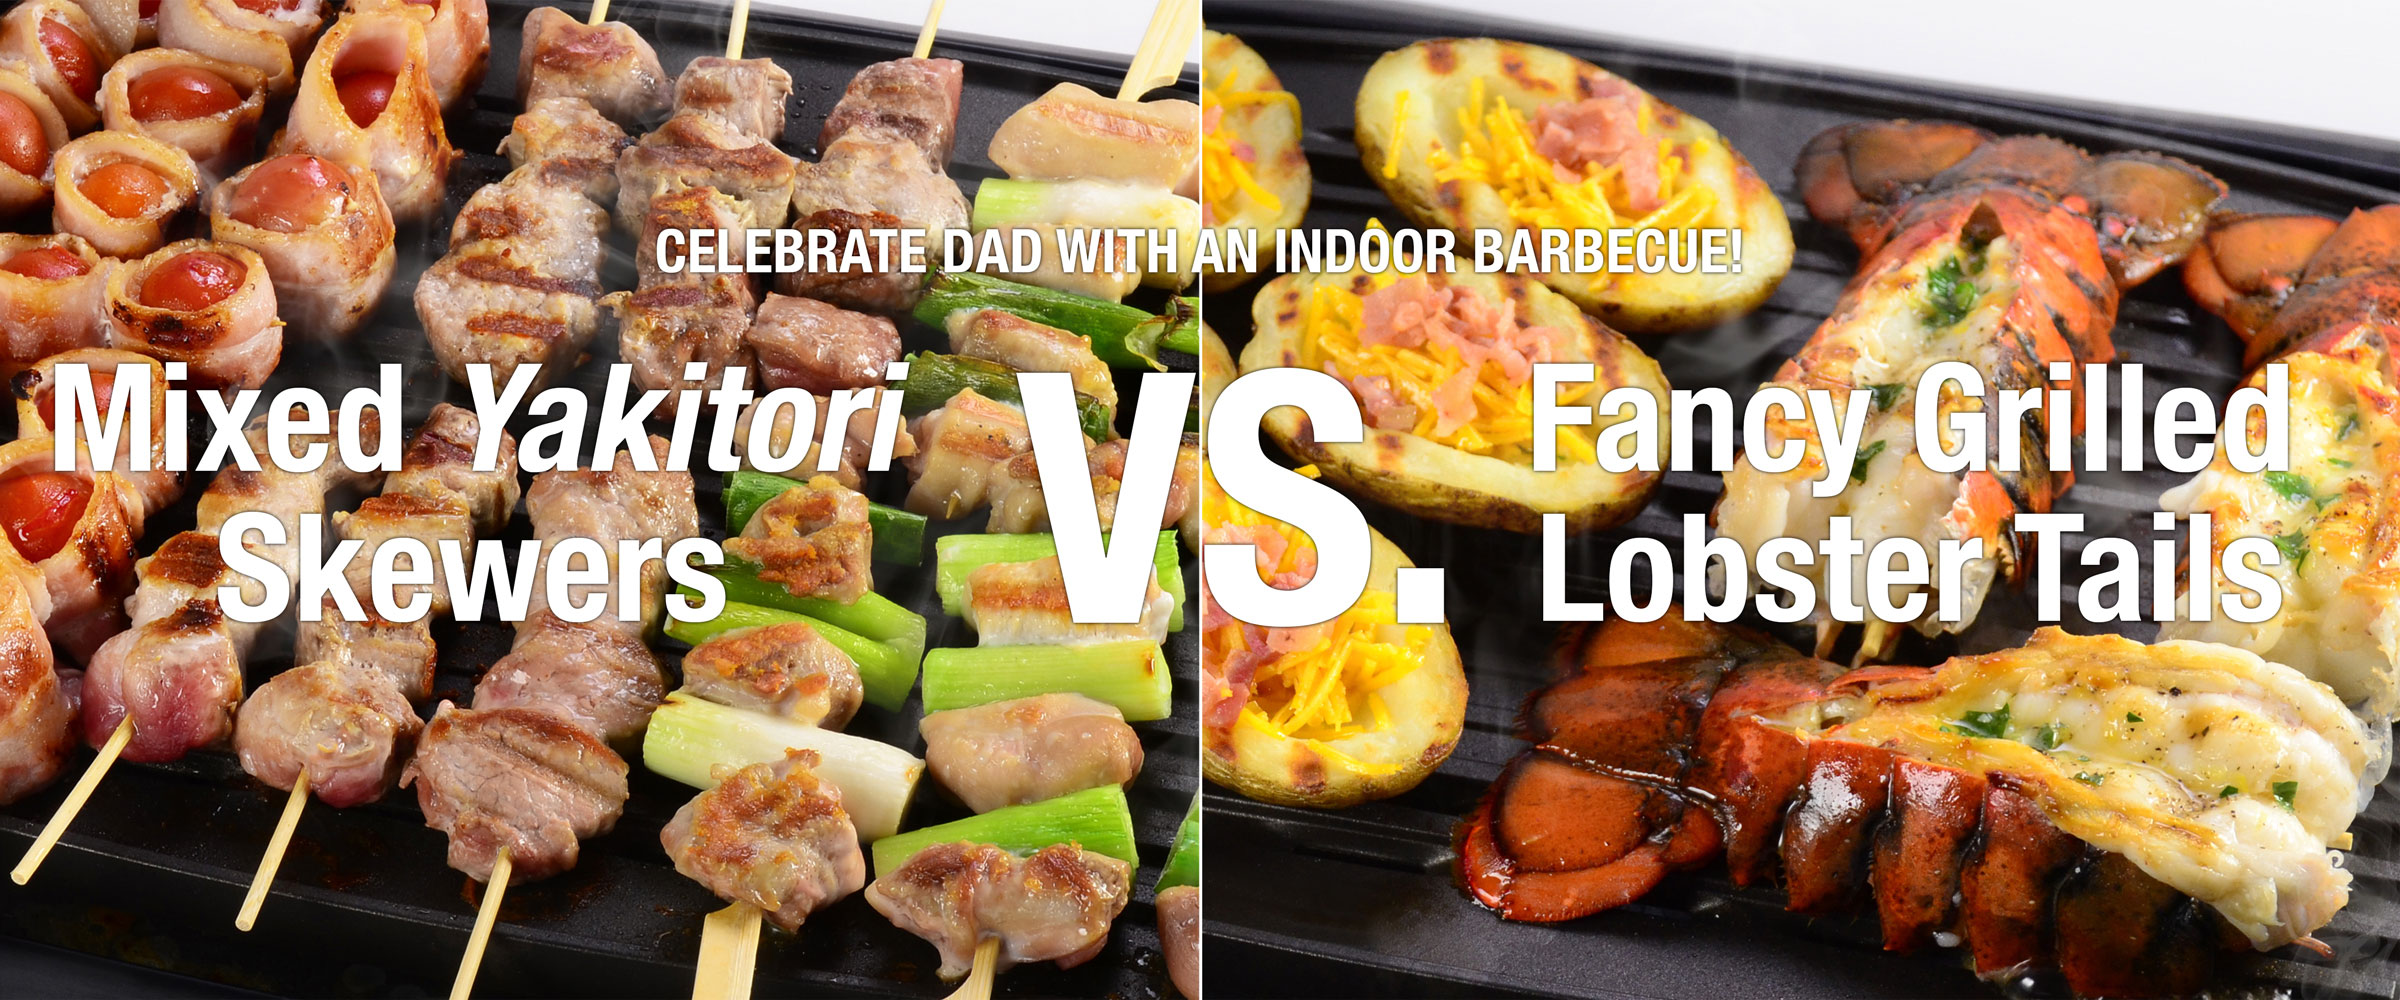 WCELEBRATE DAD WITH AN INDOOR BARBECUE!